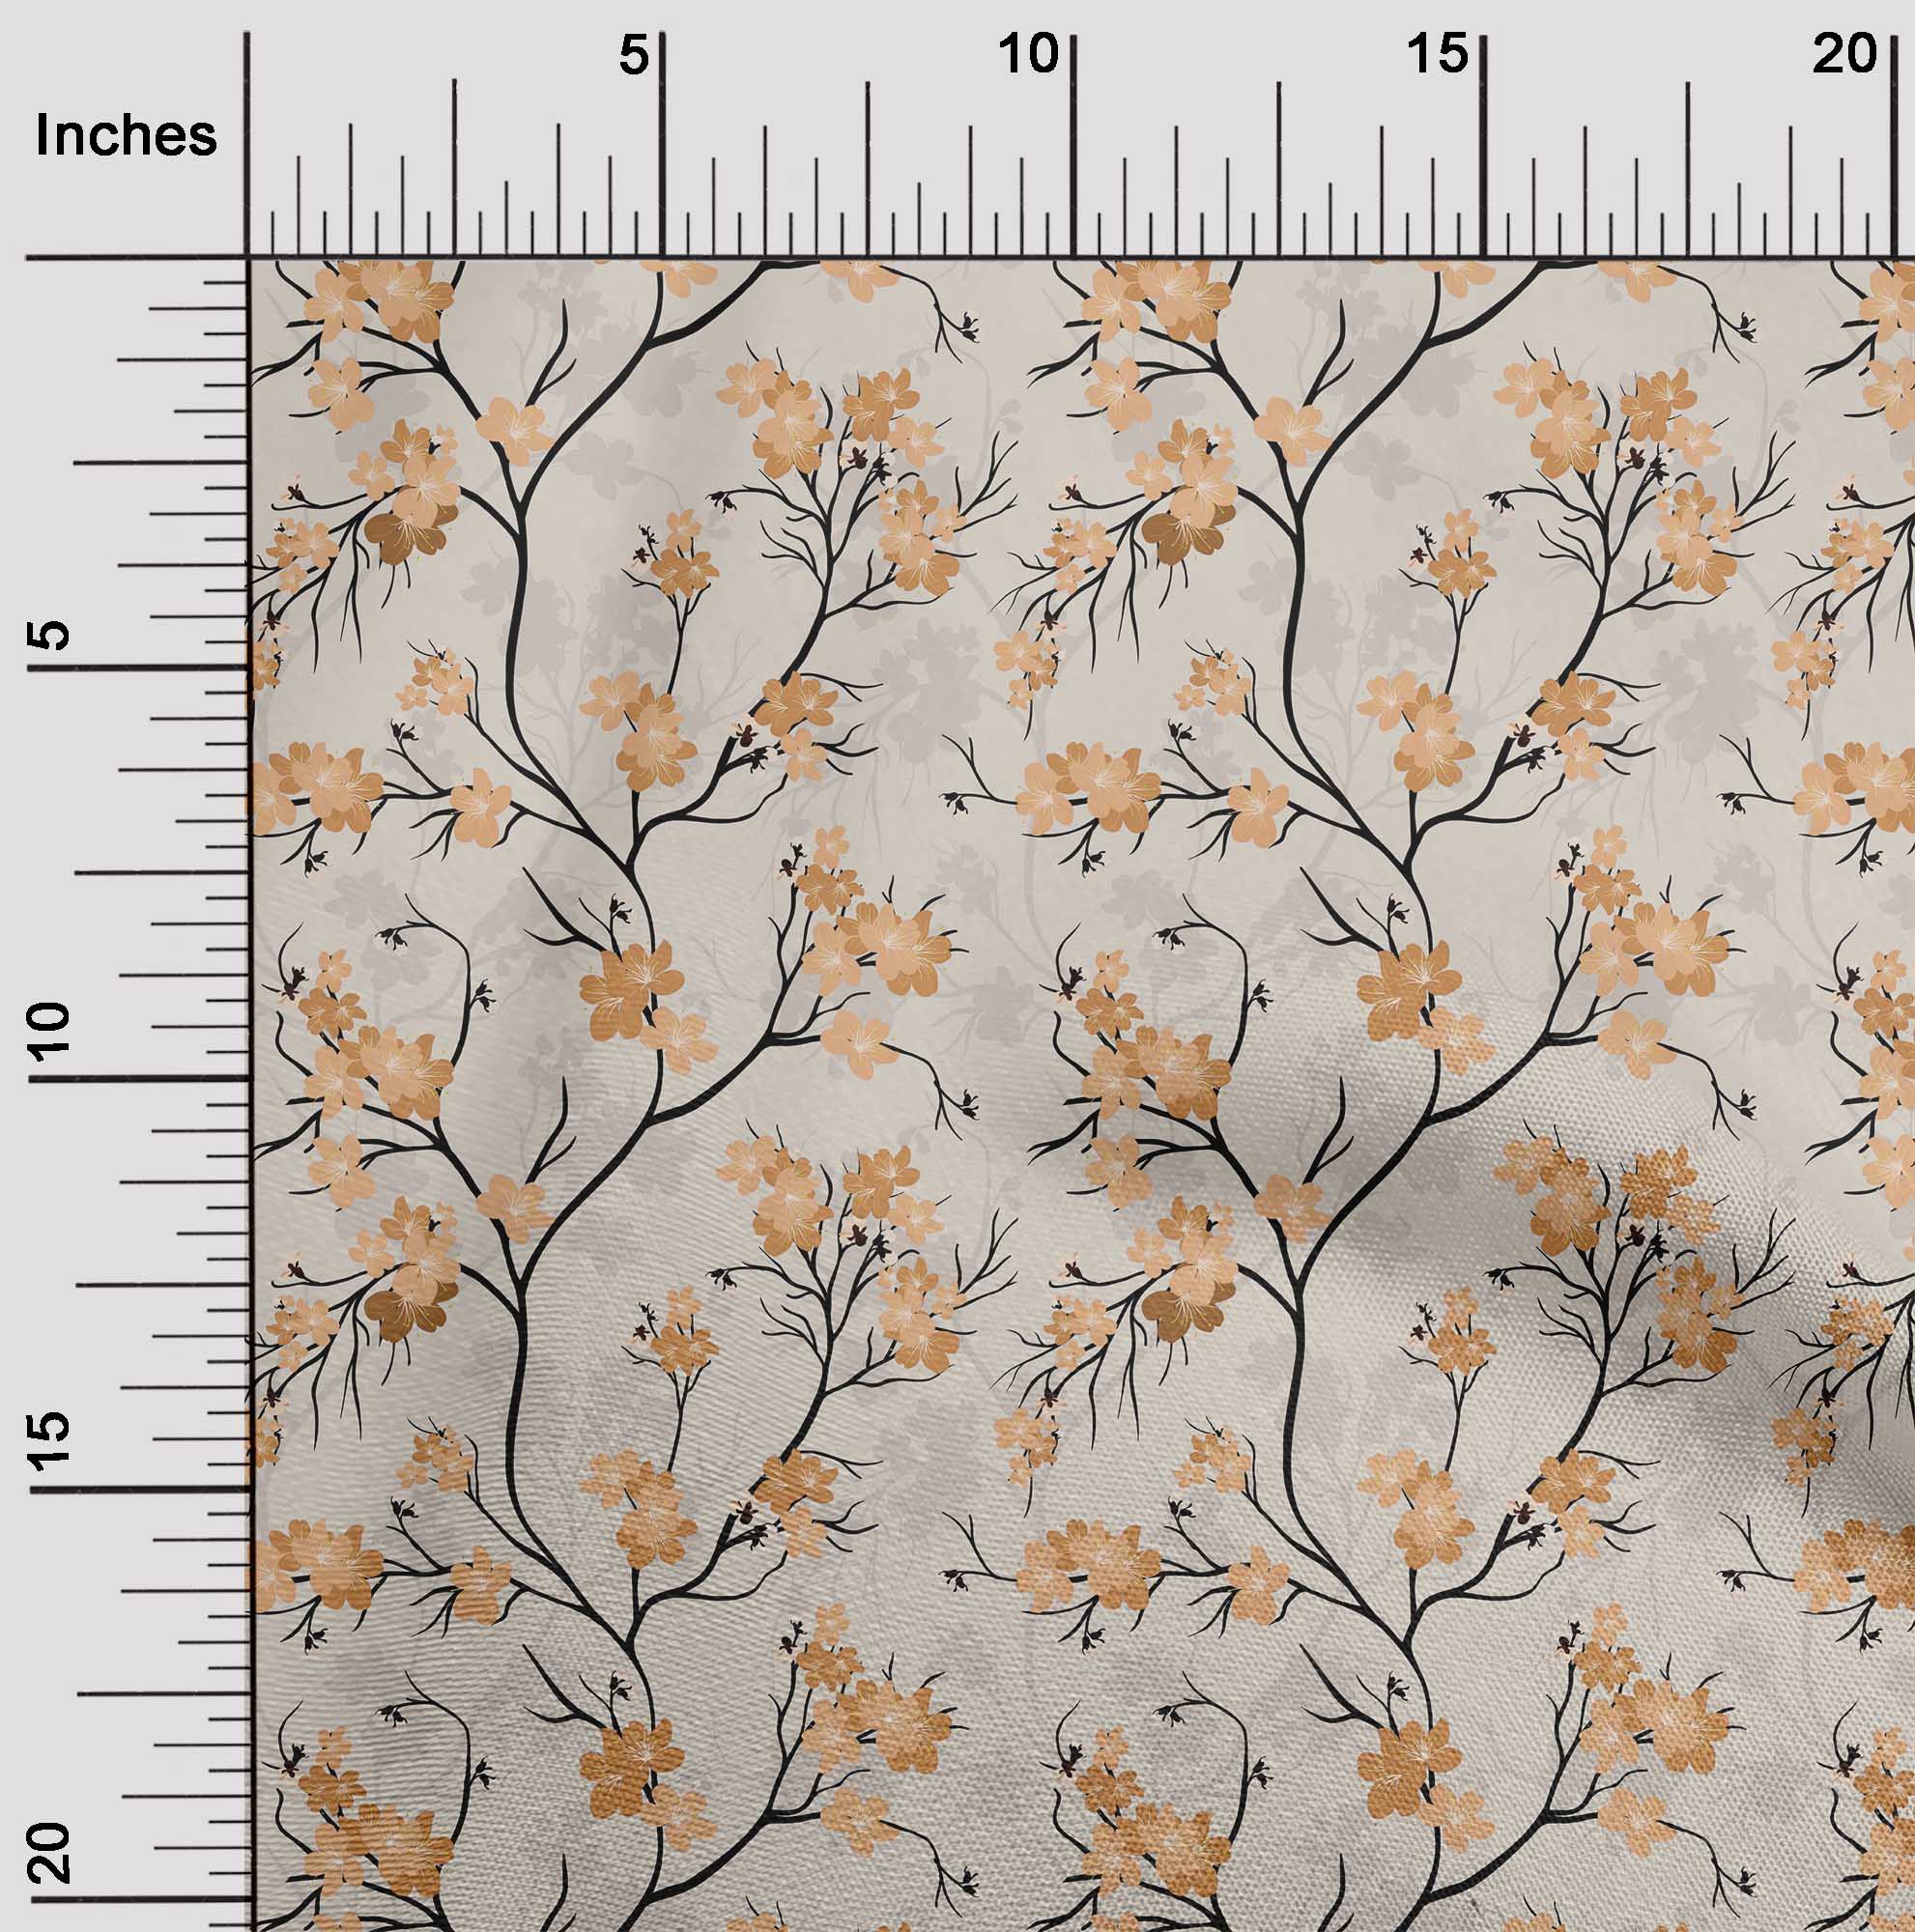 oneOone Cotton Jersey Brown Fabric Floral Quilting Supplies Print Sewing Fabric By The Yard 58 Inch Wide - image 2 of 5